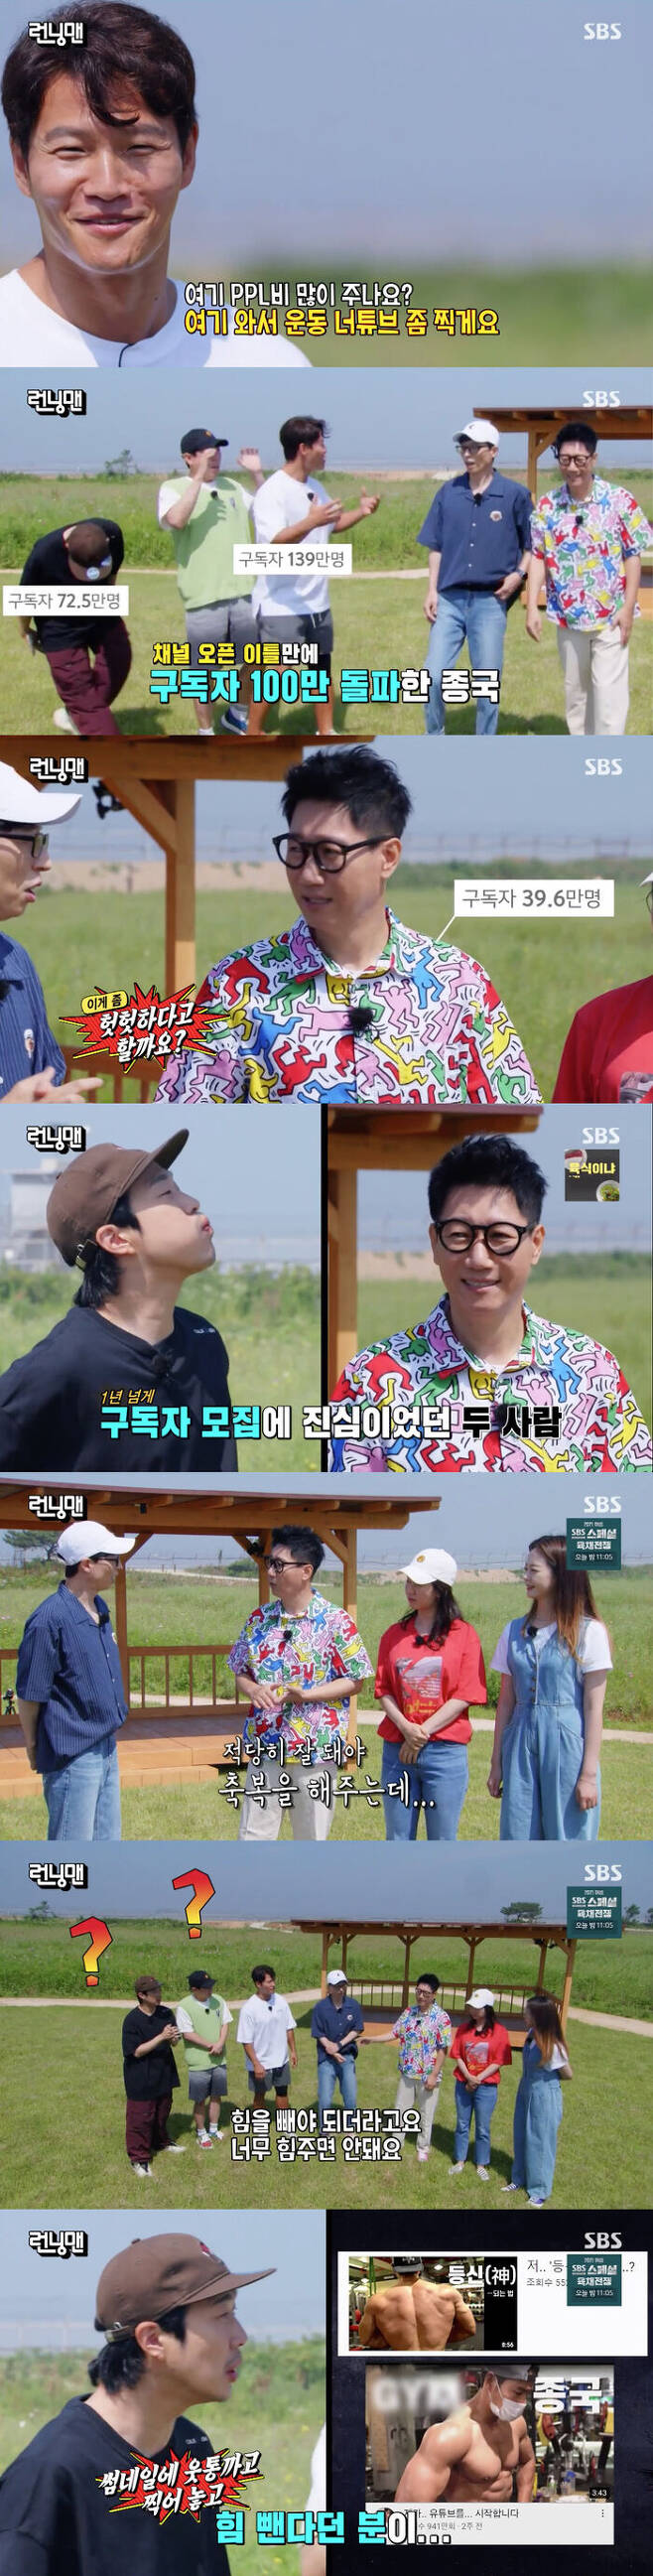 Haha and Ji Suk-jin have marked Kim Jong-kooks 1 million breakthroughs on YouTube channel Subscription.On SBS Running Man broadcasted on the 4th, Nogari Day Race was held.On this day, the members gave an opening talk to the place where they made the production paper.At this time, Kim Jong-kook said, But here you have a lot of PPL expenses. Then come here and take a video of the exercise YouTube. In his YouTube mention, Haha envied Do not even say YouTube citron, and Yang Se-chan congratulated him on exceeding 1 million Subscriptions, saying 1 million, 1 million.Yoo Jae-Suk said, I should say it is futile, Kim Jong-kook, who has surpassed 1 million Subscriptions in two days after opening the channel. Ji Suk-jin and Haha have tried to recruit Subscriptions for the past year, but there is still no one million, but Kim Jong-kook has already exceeded 1 million.Kim Jong-kook then thanked the 139 million health workers, saying, I did not know, but the athletes were hiding. Haha said, I really blessed up to 500,000.I was blessed with this momentum. And Ji Suk-jin said, Its too good to bless. Is that a man?I wanted to, he said, making a laugh.Haha was gloomy, Honestly untasting, so I lost weight, while Kim Jong-kook advised, You have to lose strength; you cant give it strength.Haha then caught his eye by saying, Take off your thumbnail and take off your strength.